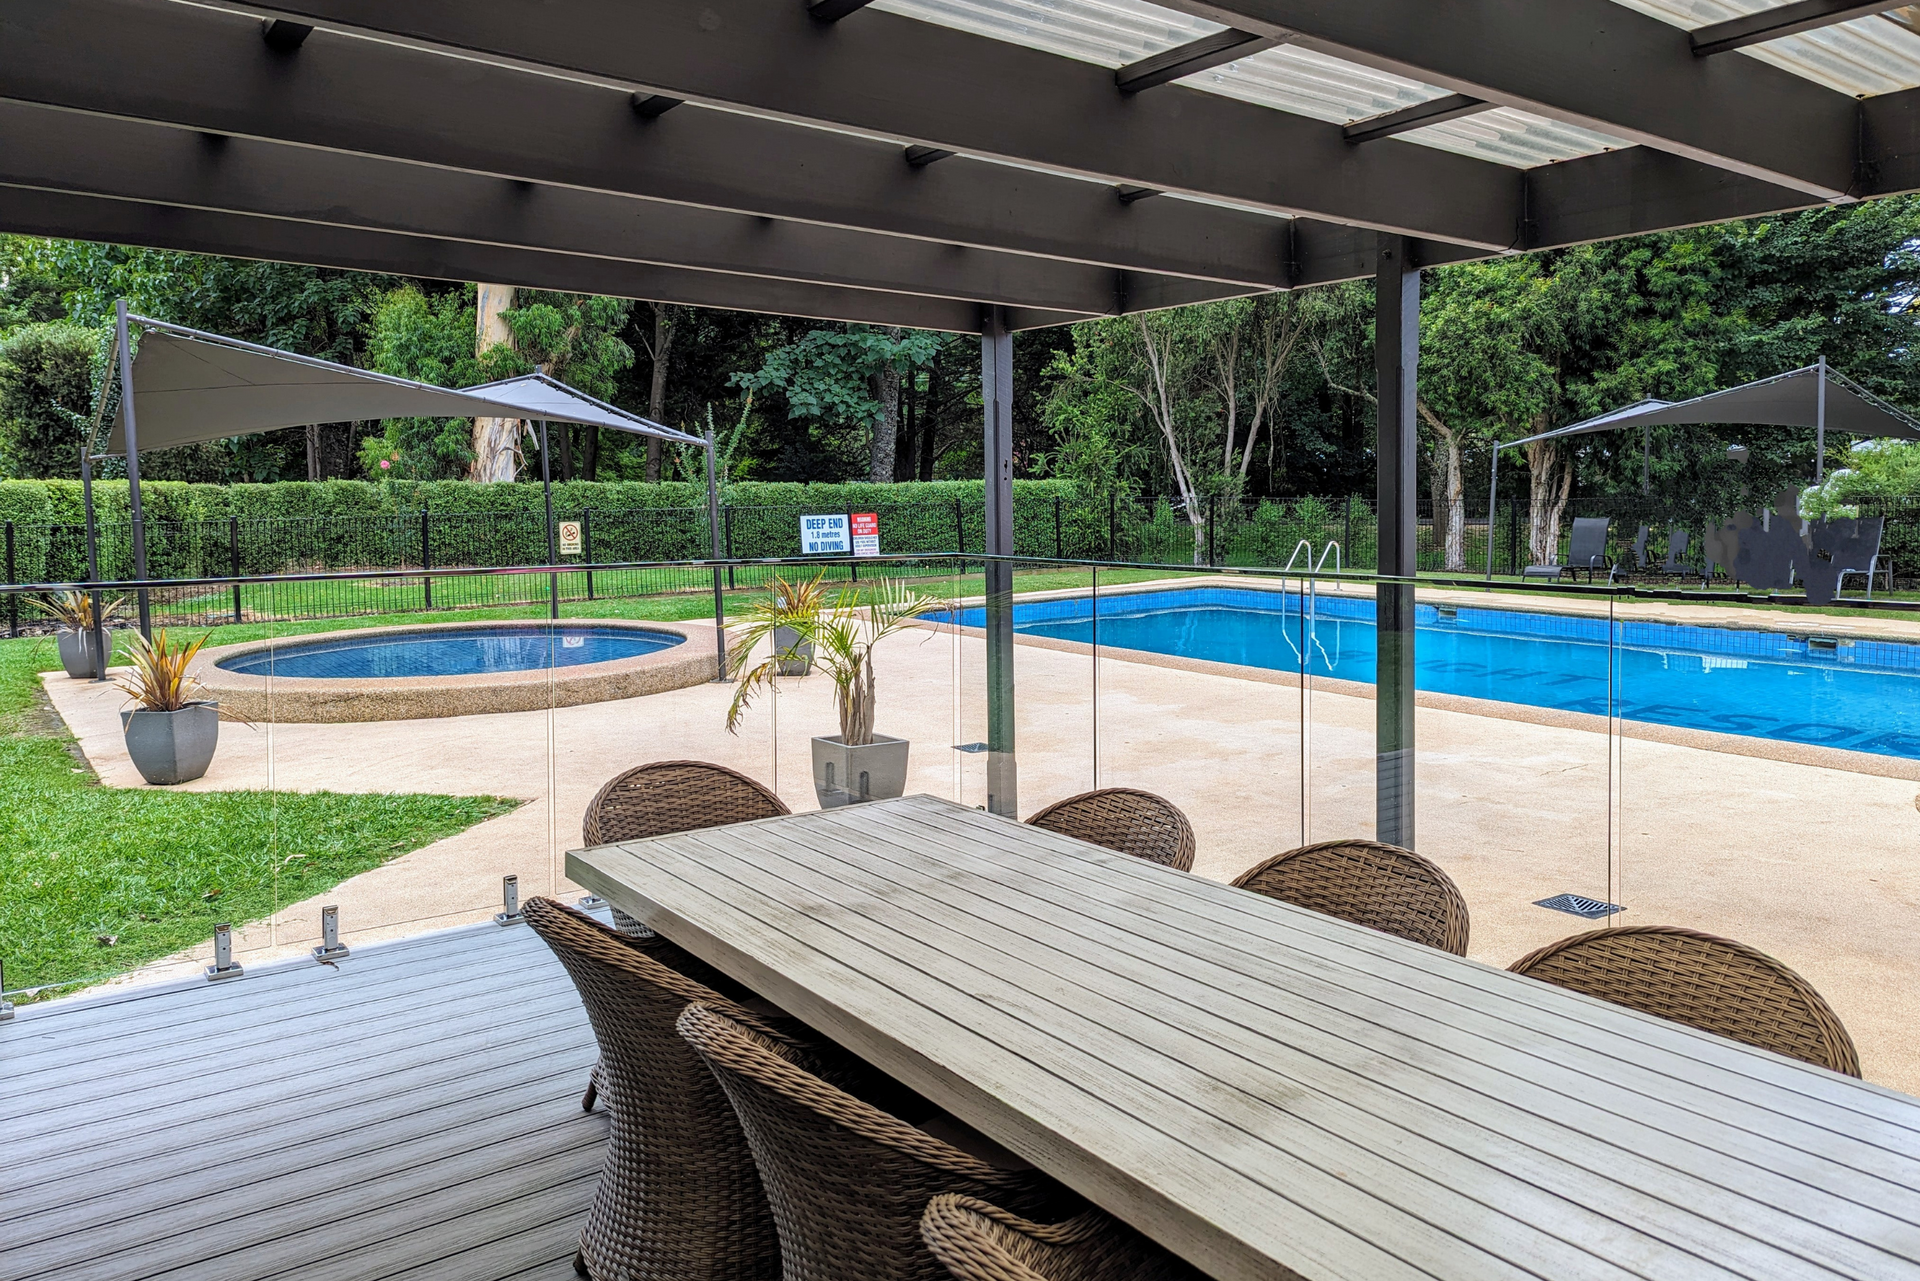 A table and chairs are sitting under a pergola next to a swimming pool.